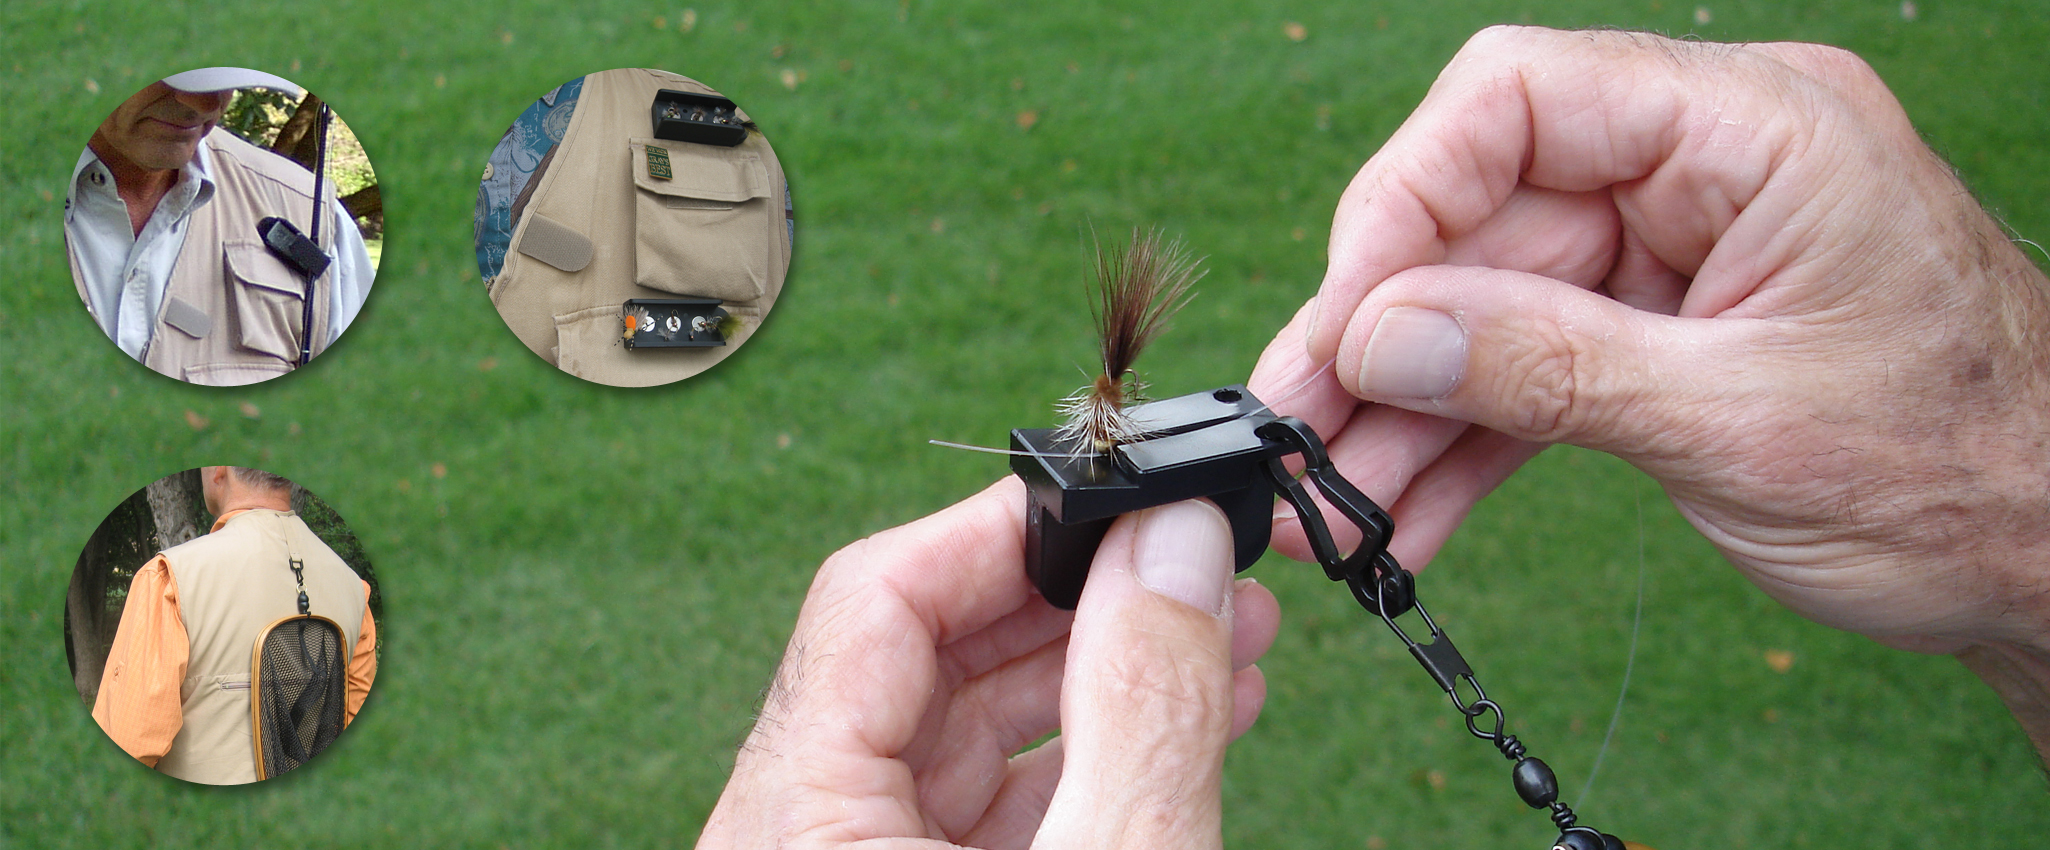 Tight Line Enterprises - Rod Transport Systems, Fly Fishing Products,  Magnetic Fly Guard